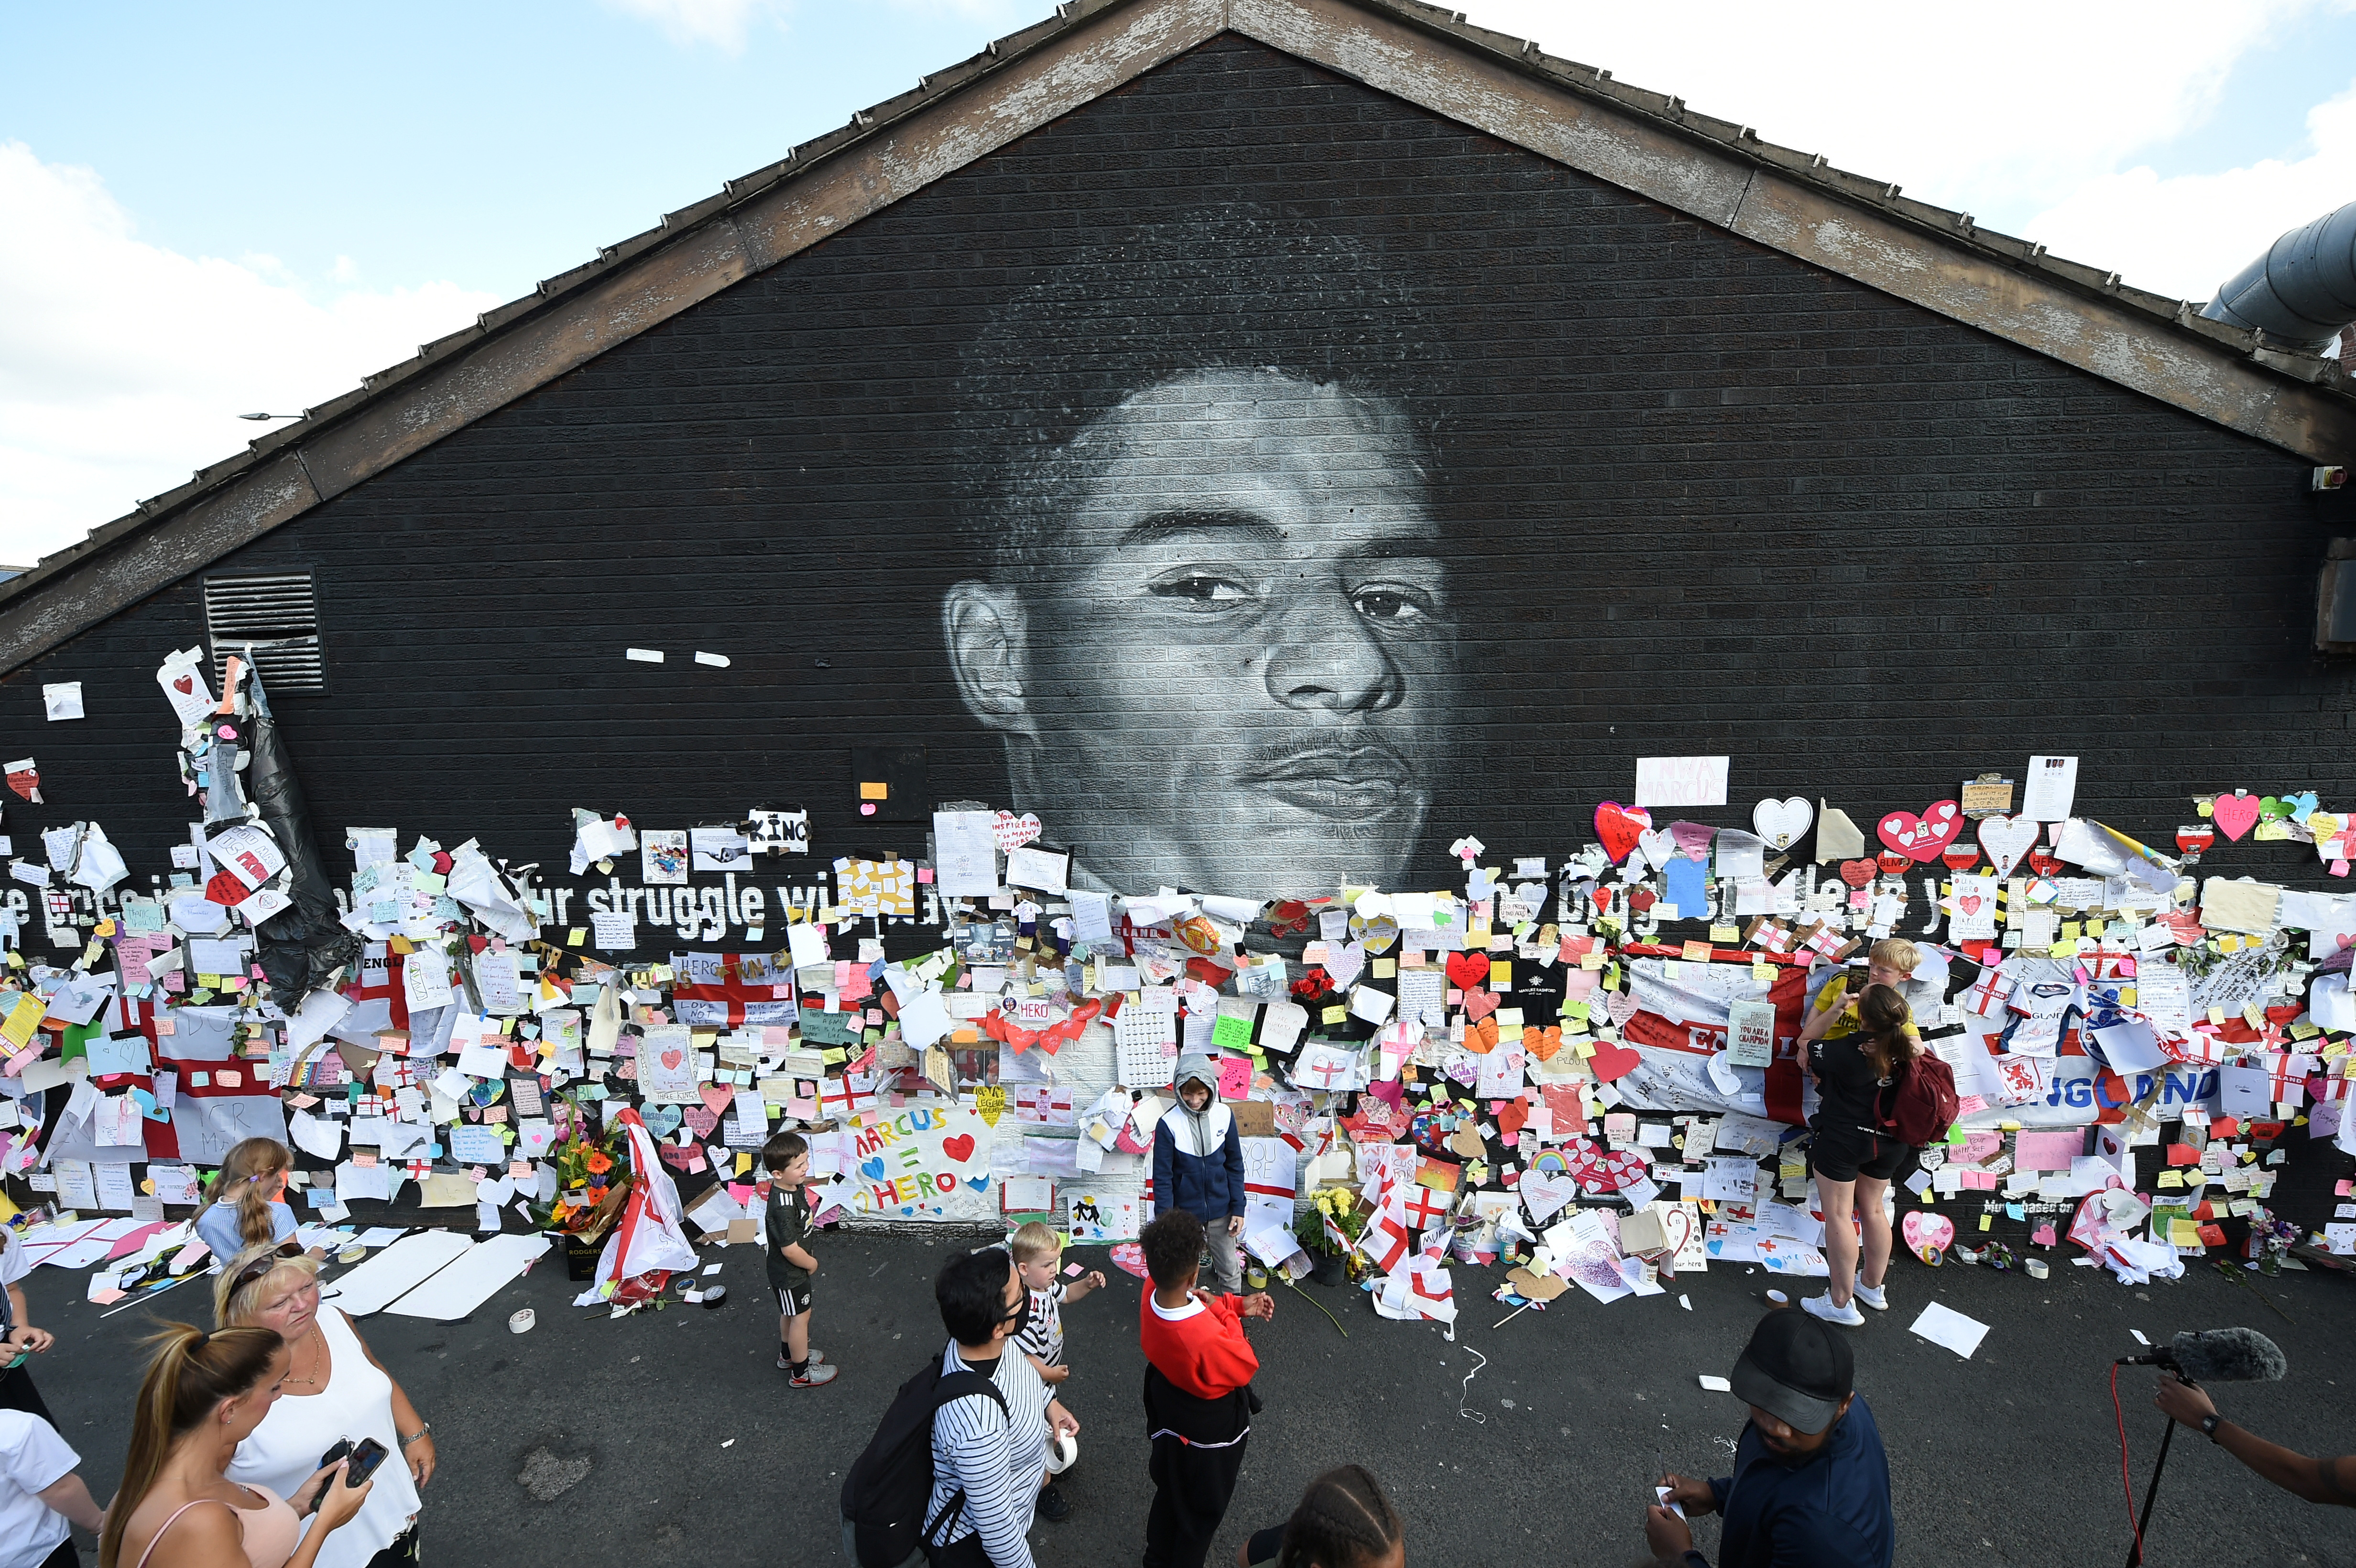 Stand Up to Racism Demonstration at the Marcus Rashford mural after it was defaced following the Euro 2020 Final between Italy and England